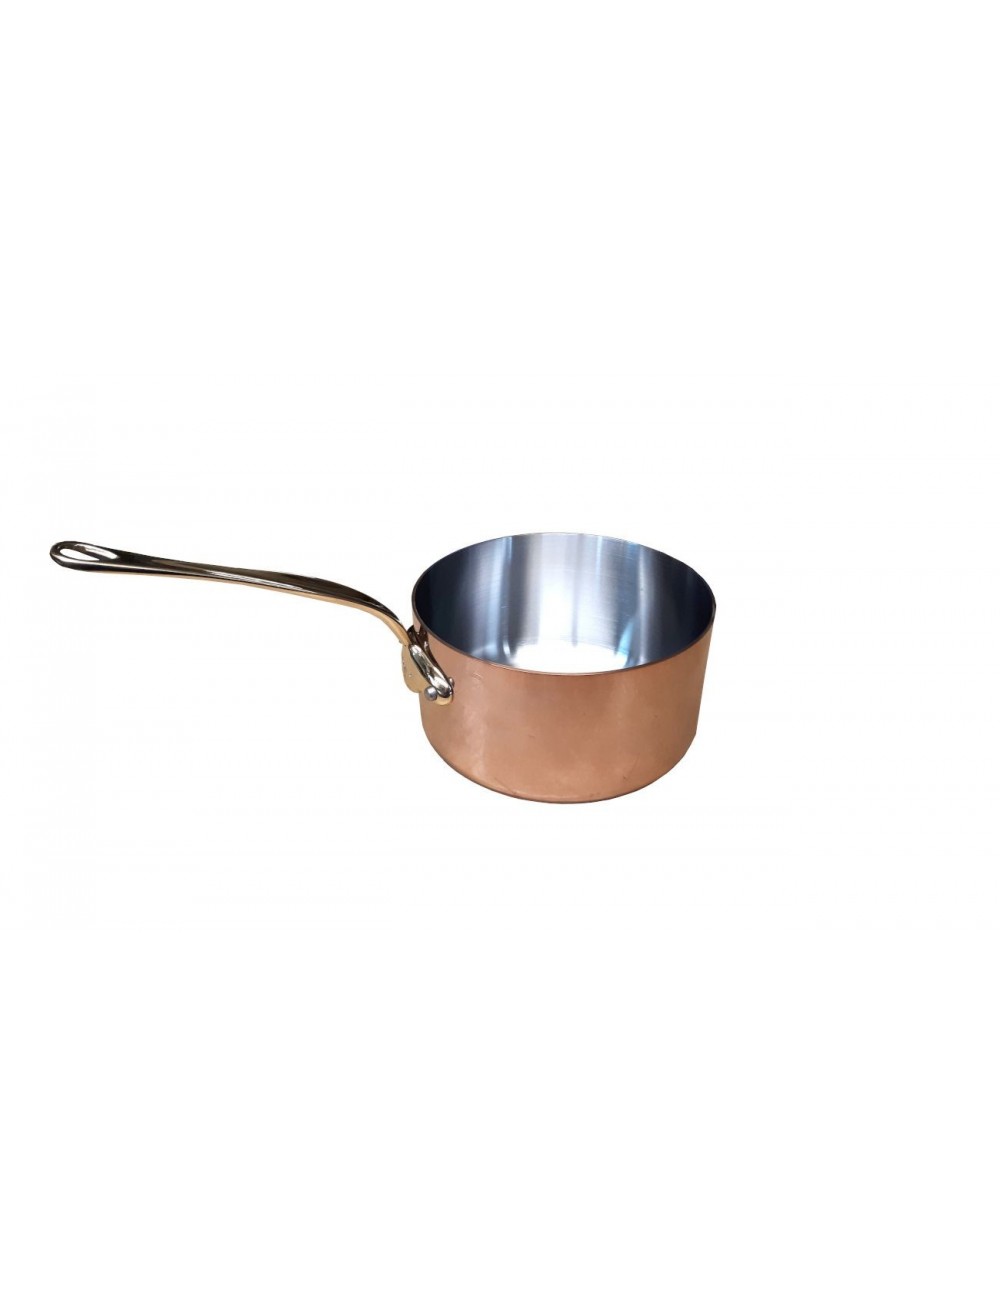 SAUCEPAN IN COPPER & STAINLESS STEEL - TABLE SERVICE - BRONZE HANDLE